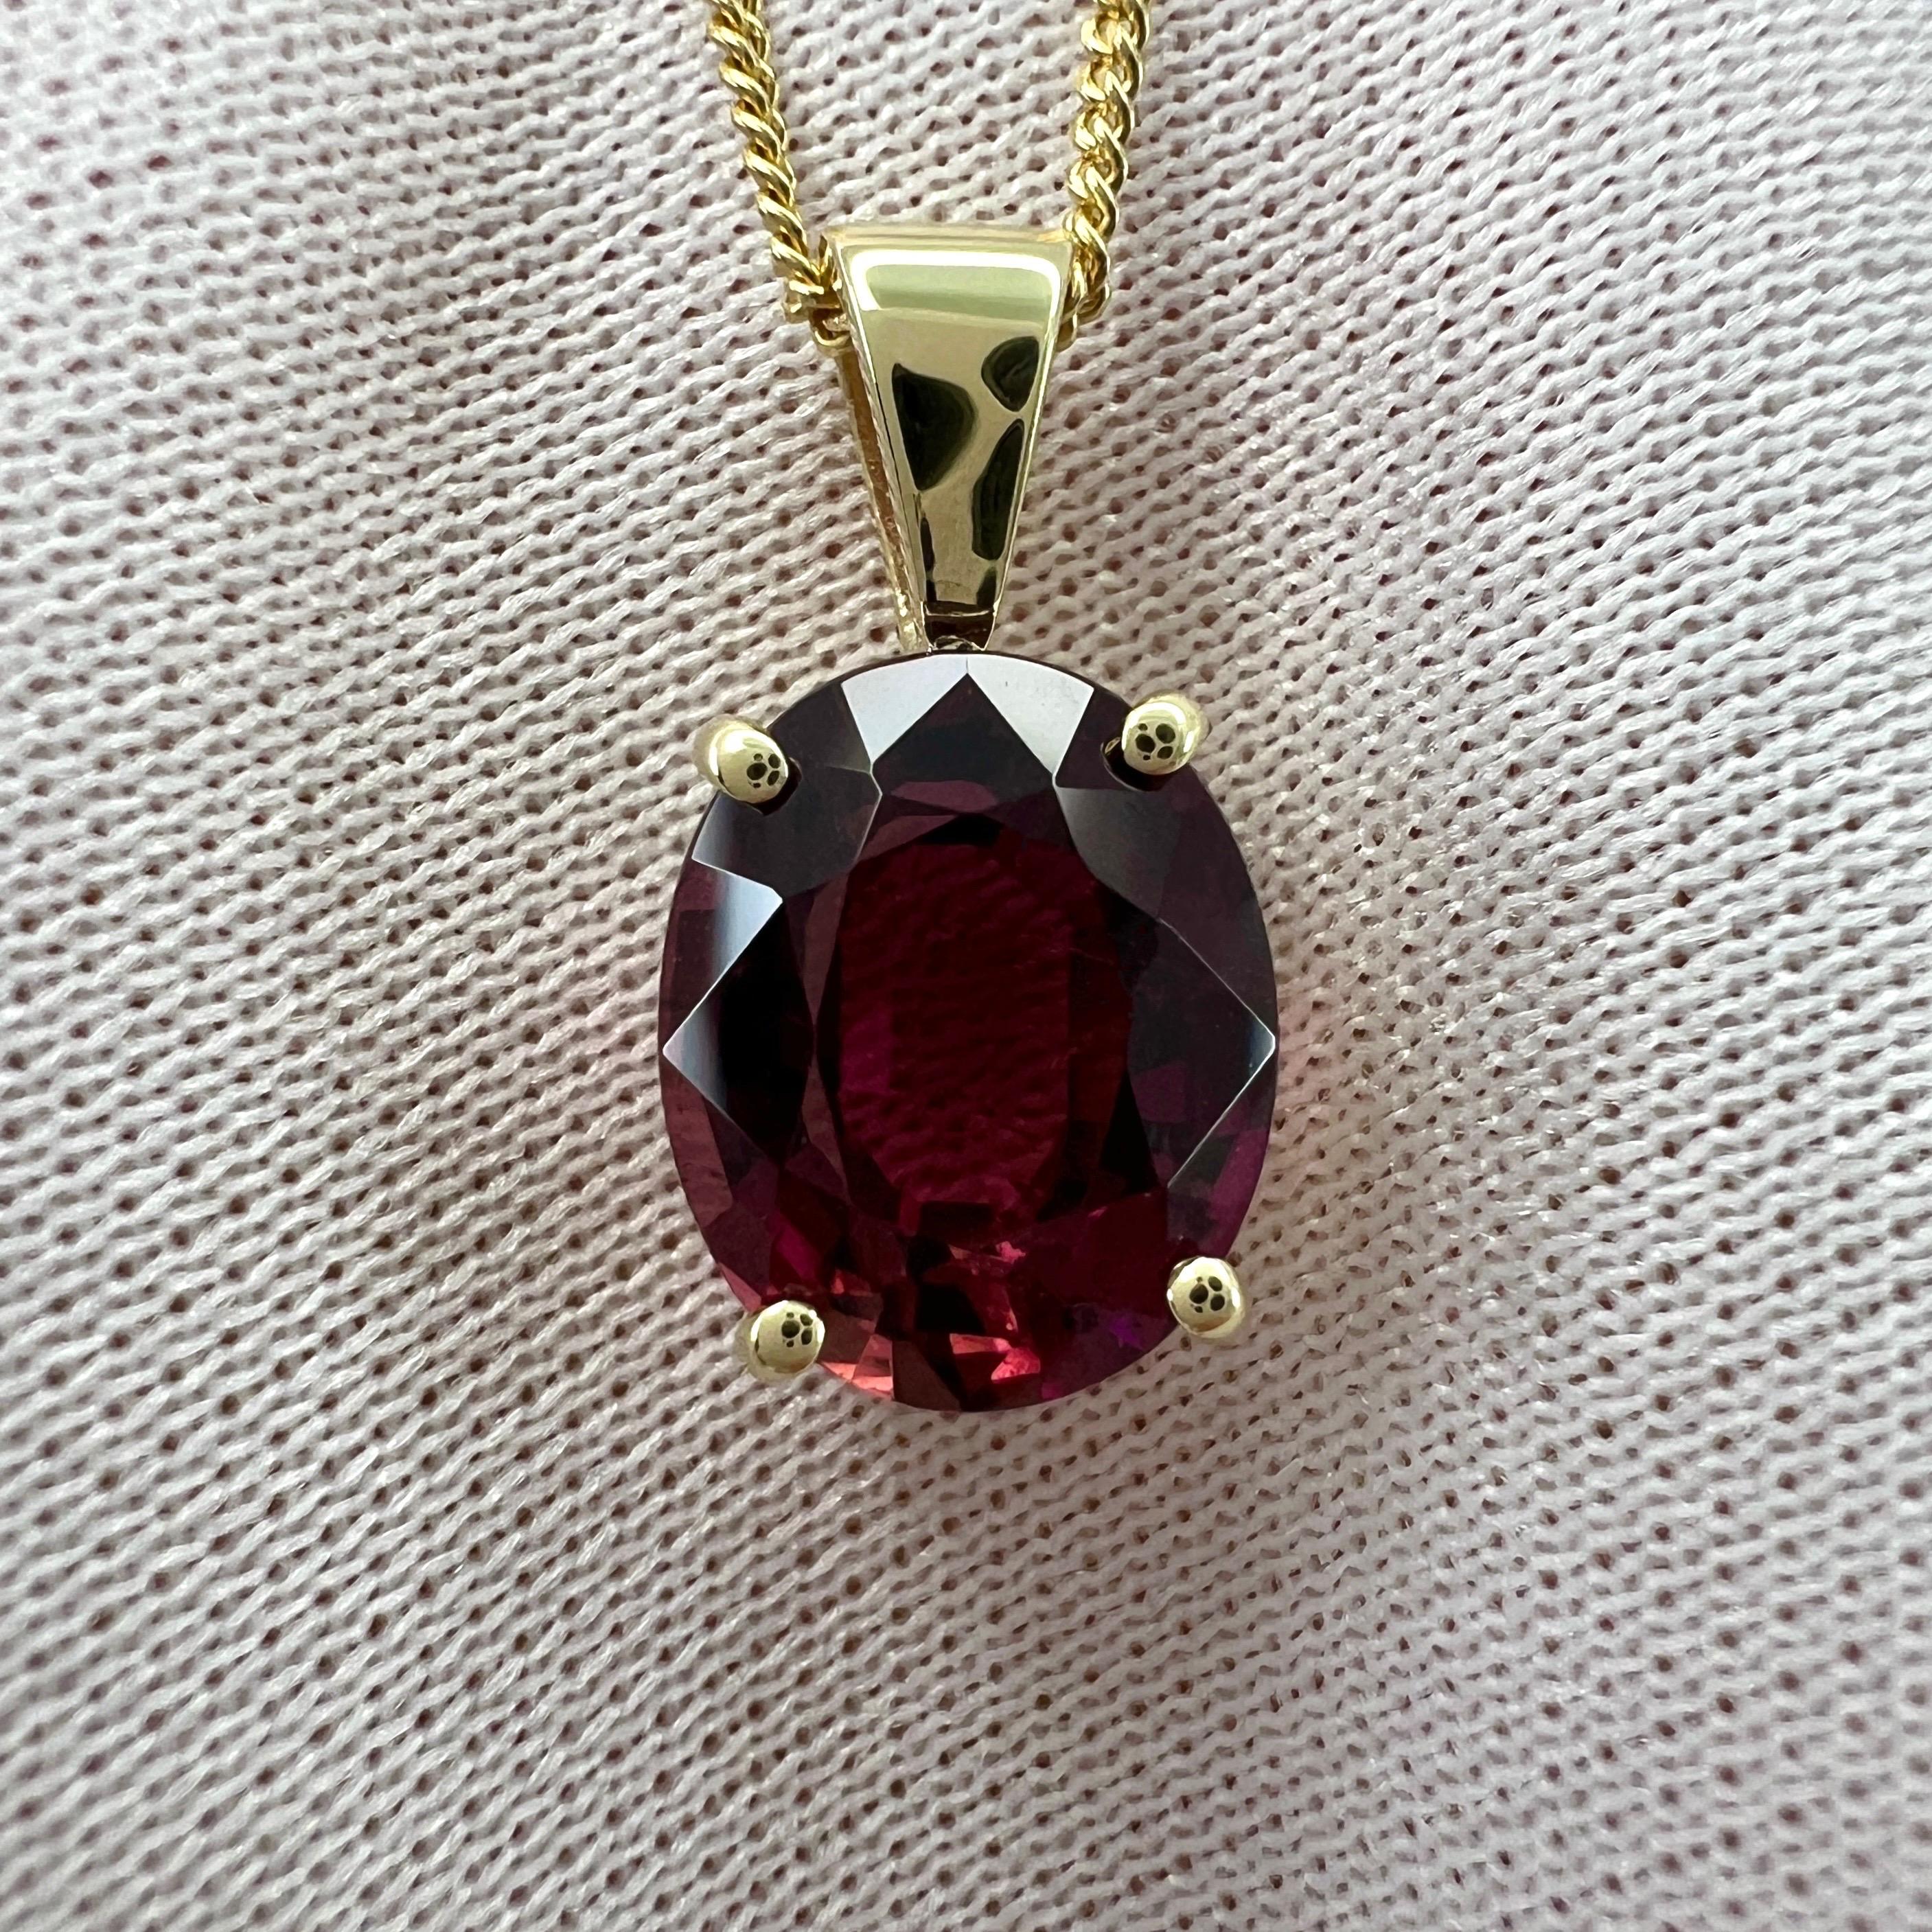 2.66ct Rubellite Tourmaline Pink Oval Cut 9k Yellow Gold Pendant Necklace For Sale 5